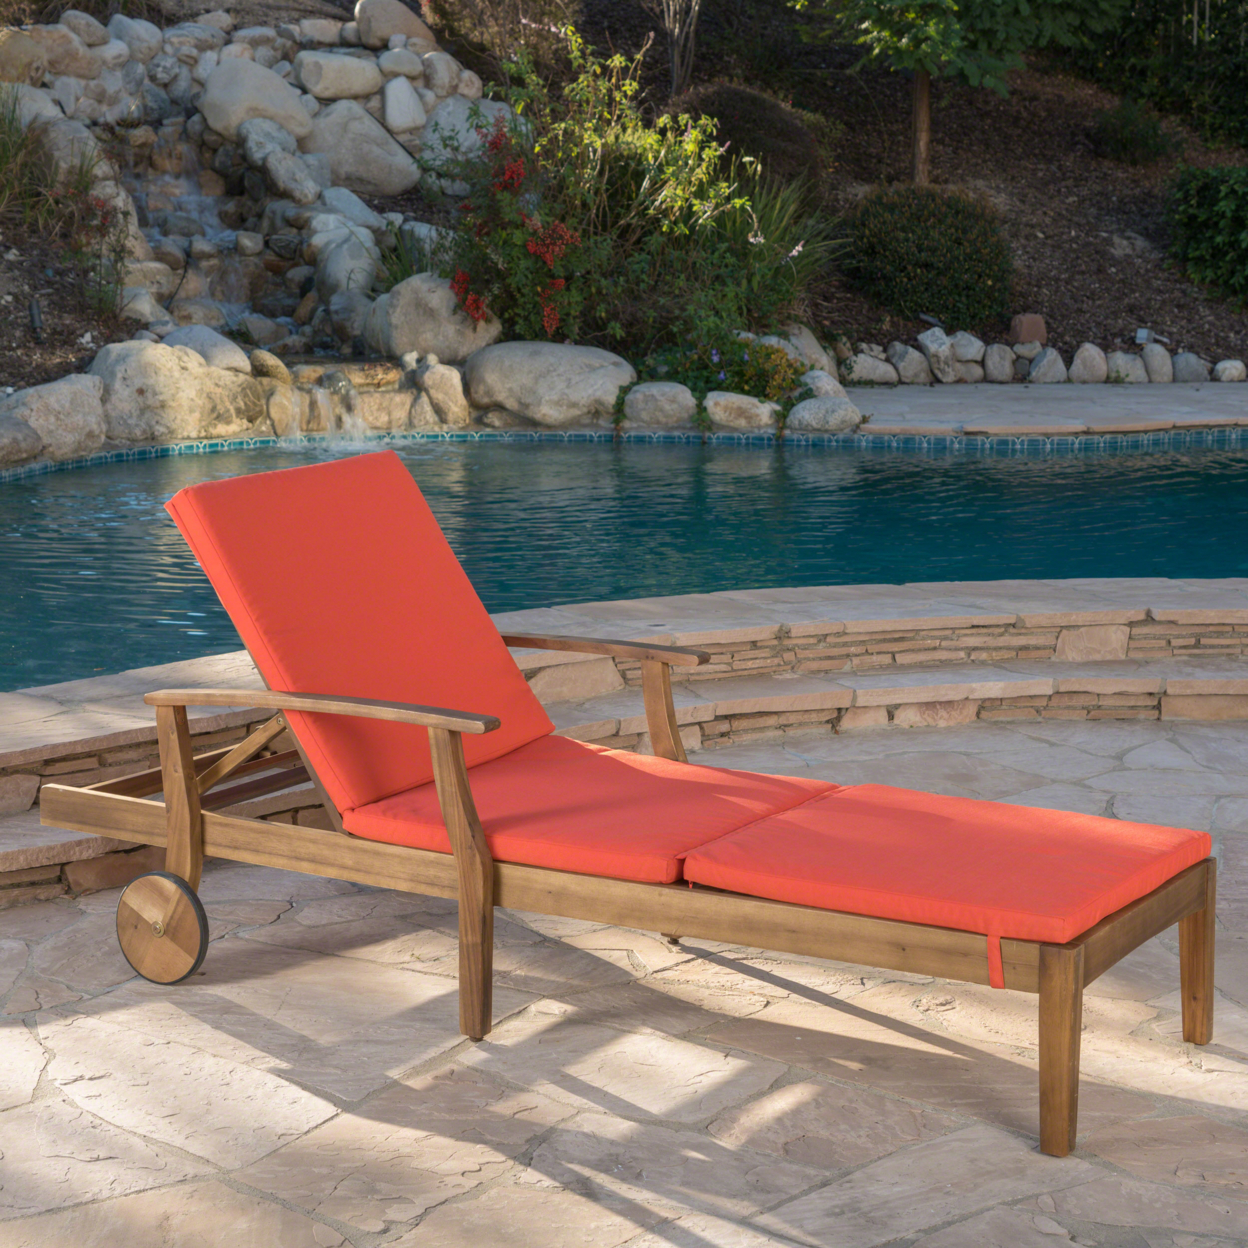 Daisy Outdoor Teak Finish Chaise Lounge With Water Resistant Cushion - Orange, Single